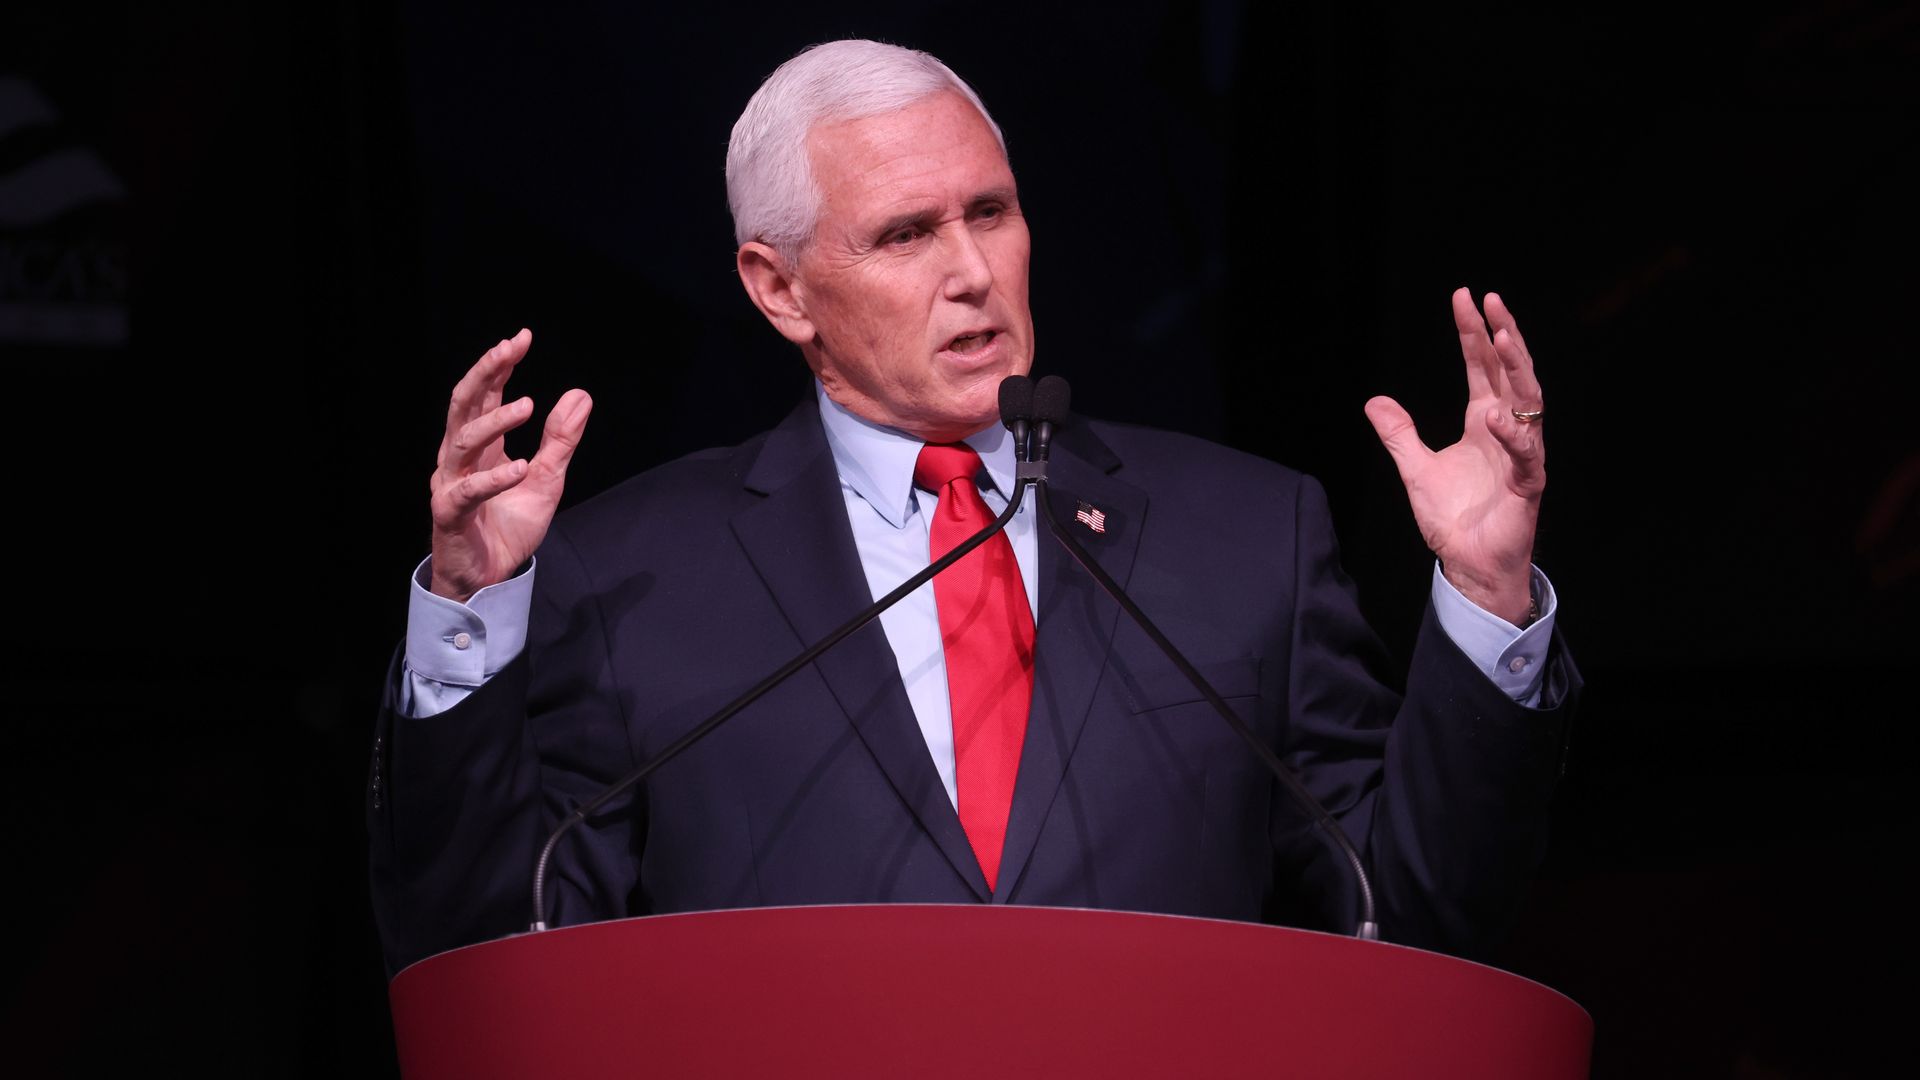 Former Vice President Mike Pence speaking at Stanford University on Feb. 17.